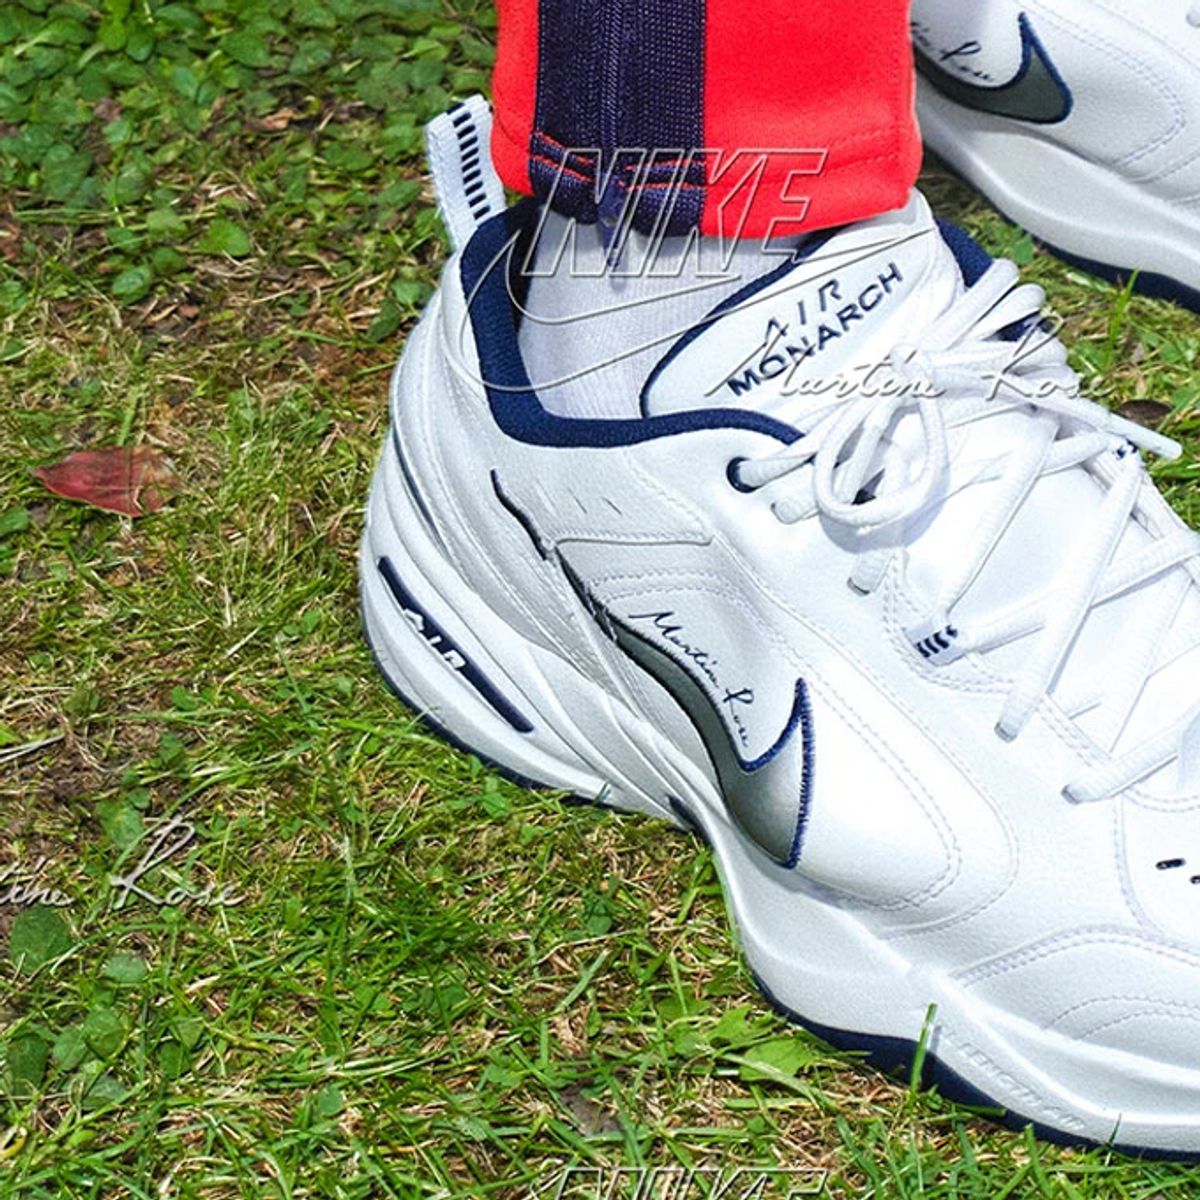 The Nike Air Monarch Louis Vuitton Custom Is The Ultimate